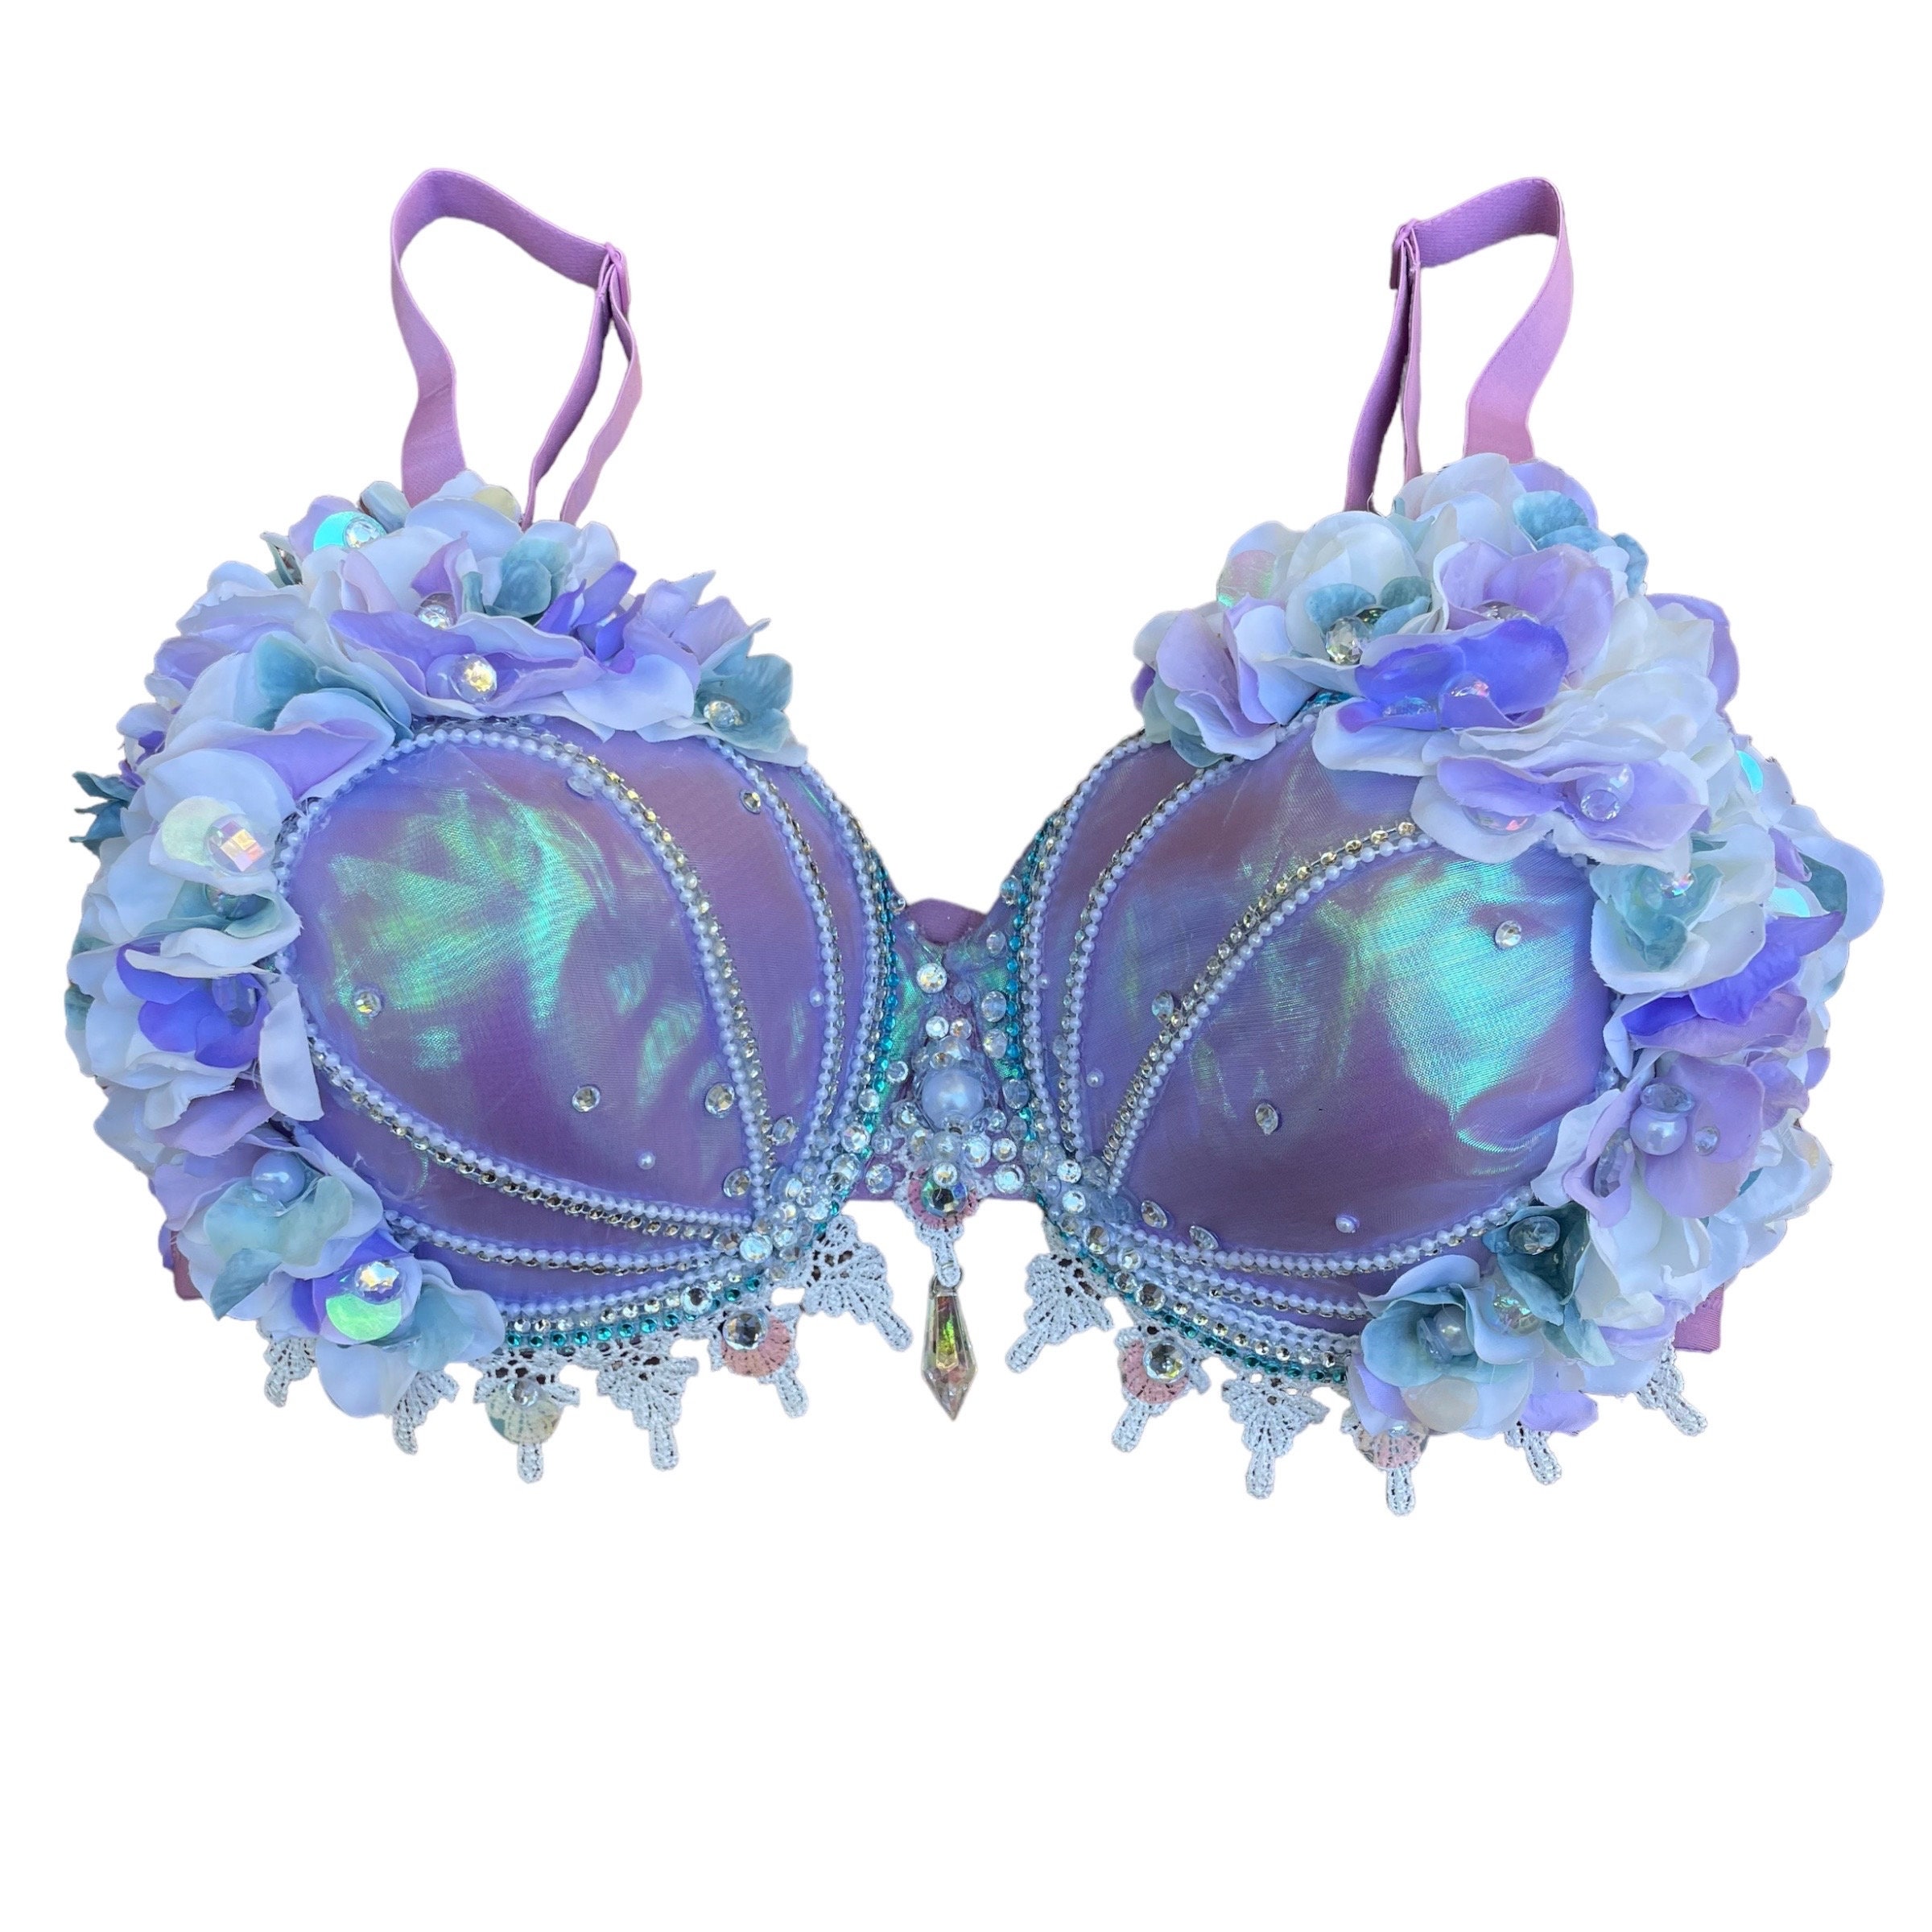 Iridescent Opal Flora Mermaid Rave Bra Top made to Order Item: Lavender  Base With White, Lilac and Teal Flowers & Pearl / Silver Accents 